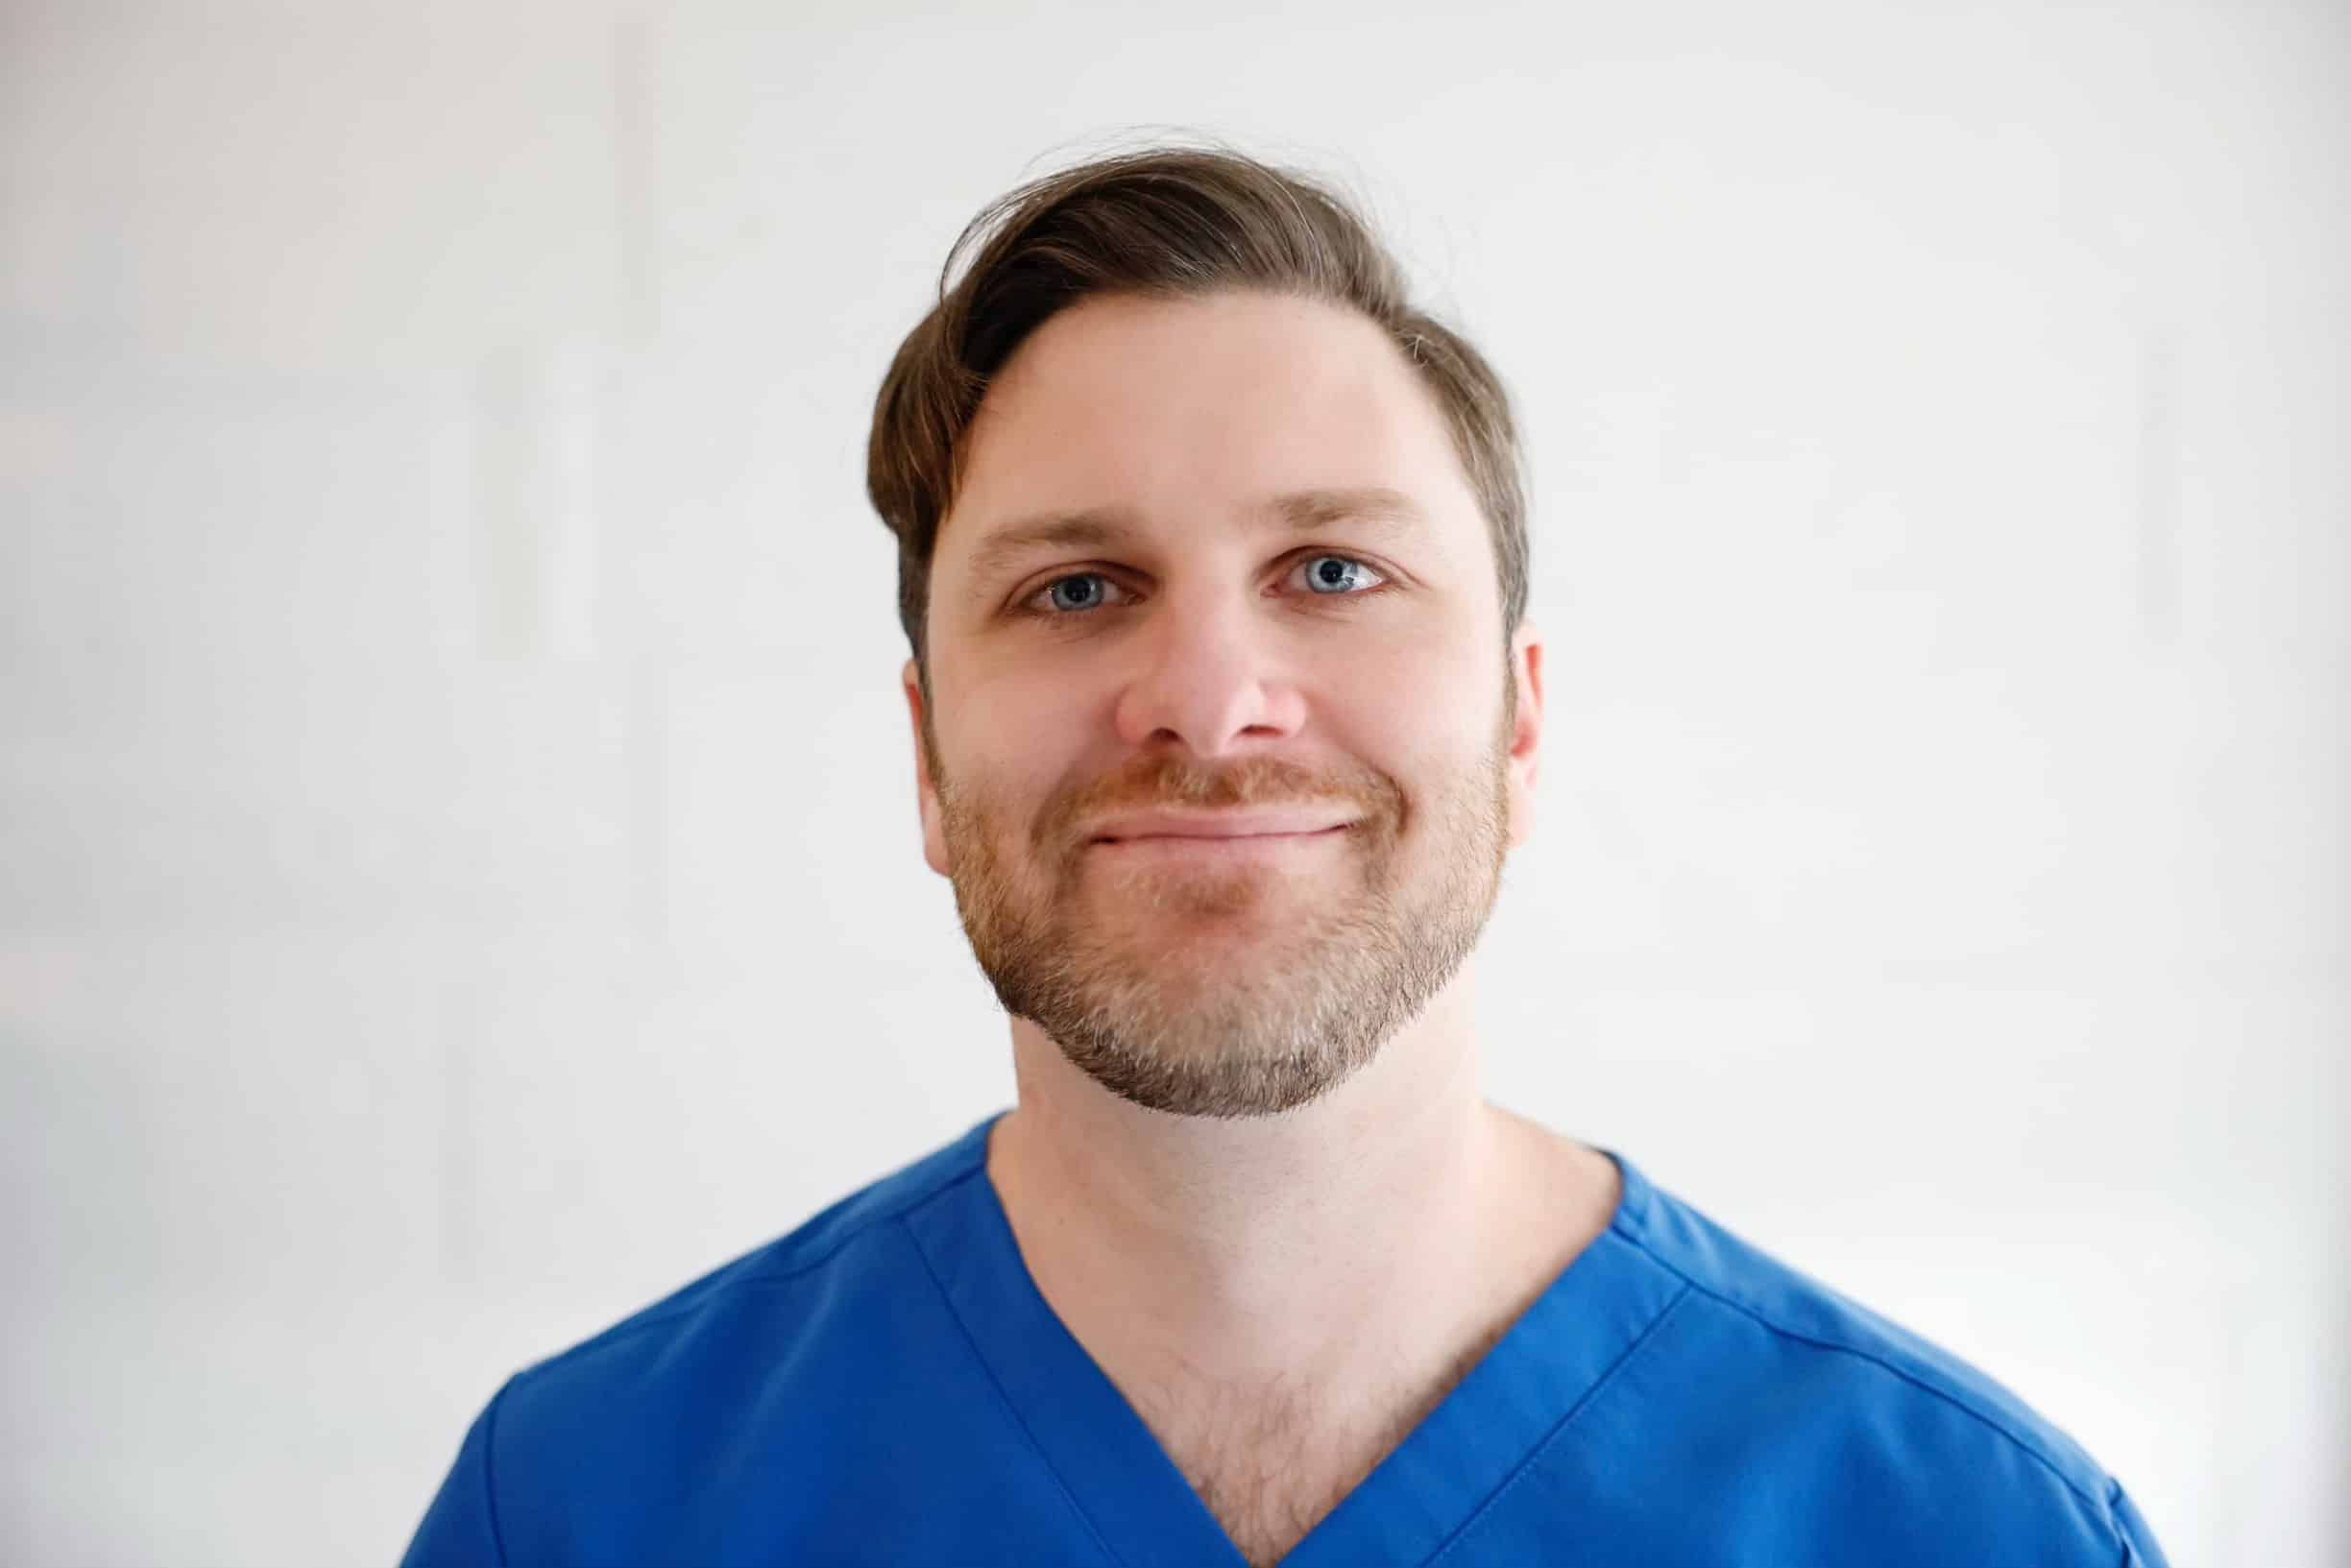 A man in a blue scrub shirt smiles for the camera.